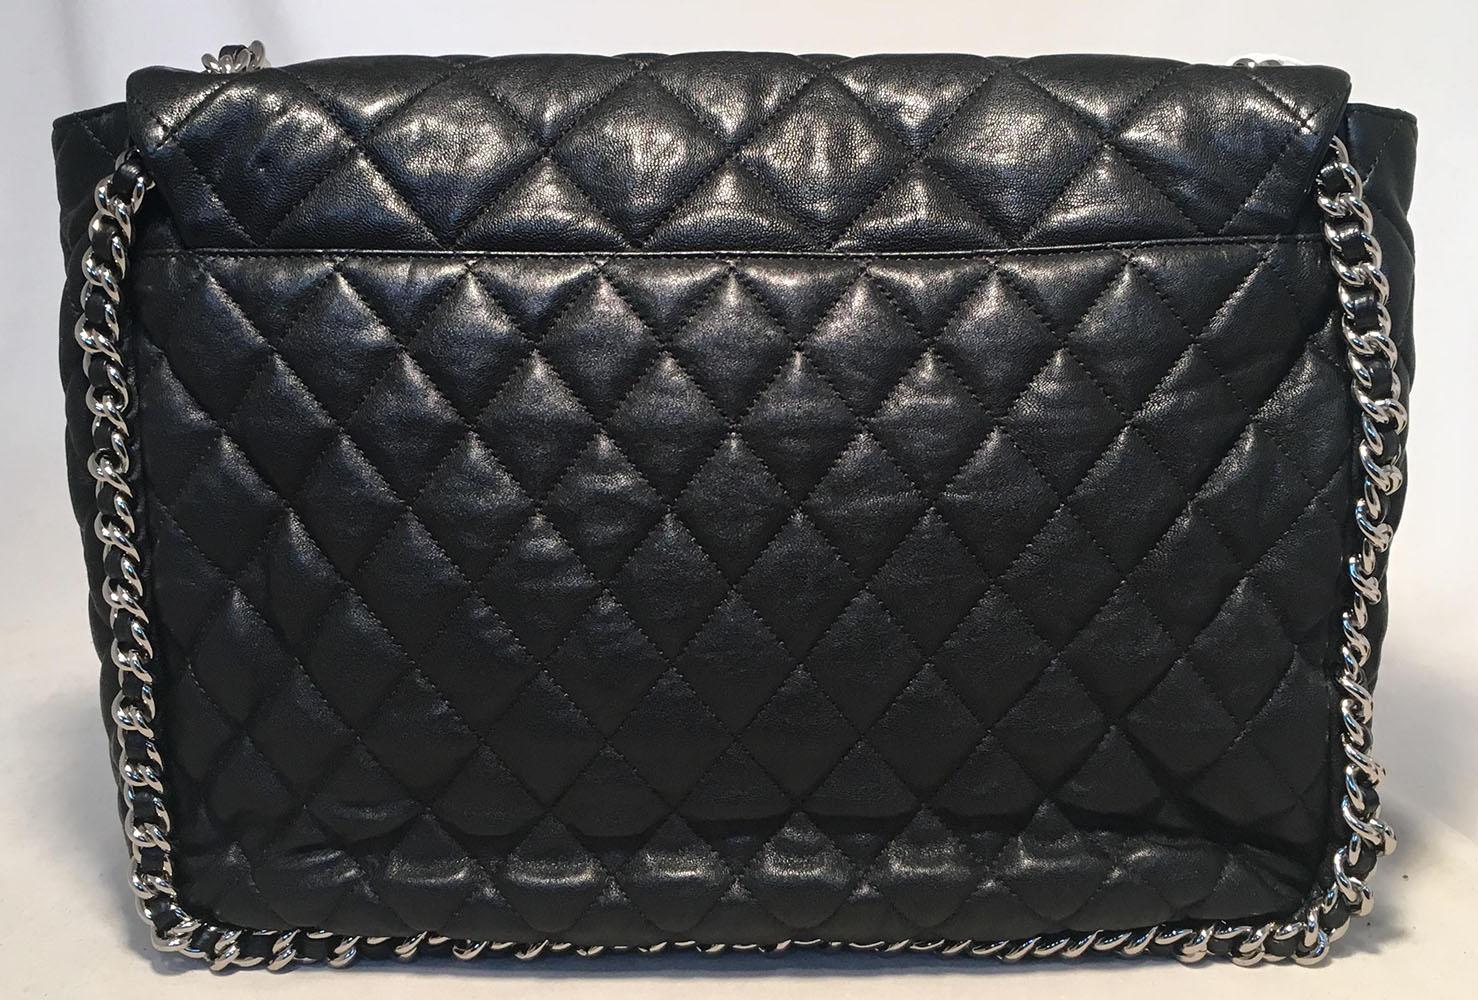 Chanel Black Quilted Leather Chain Trim Classic Maxi Flap Shoulder Bag in excellent condition.  Quilted black leather exterior trimmed with silver hardware and magnetic front CC snap closure. Single flap closure opens to a light gray nylon interior